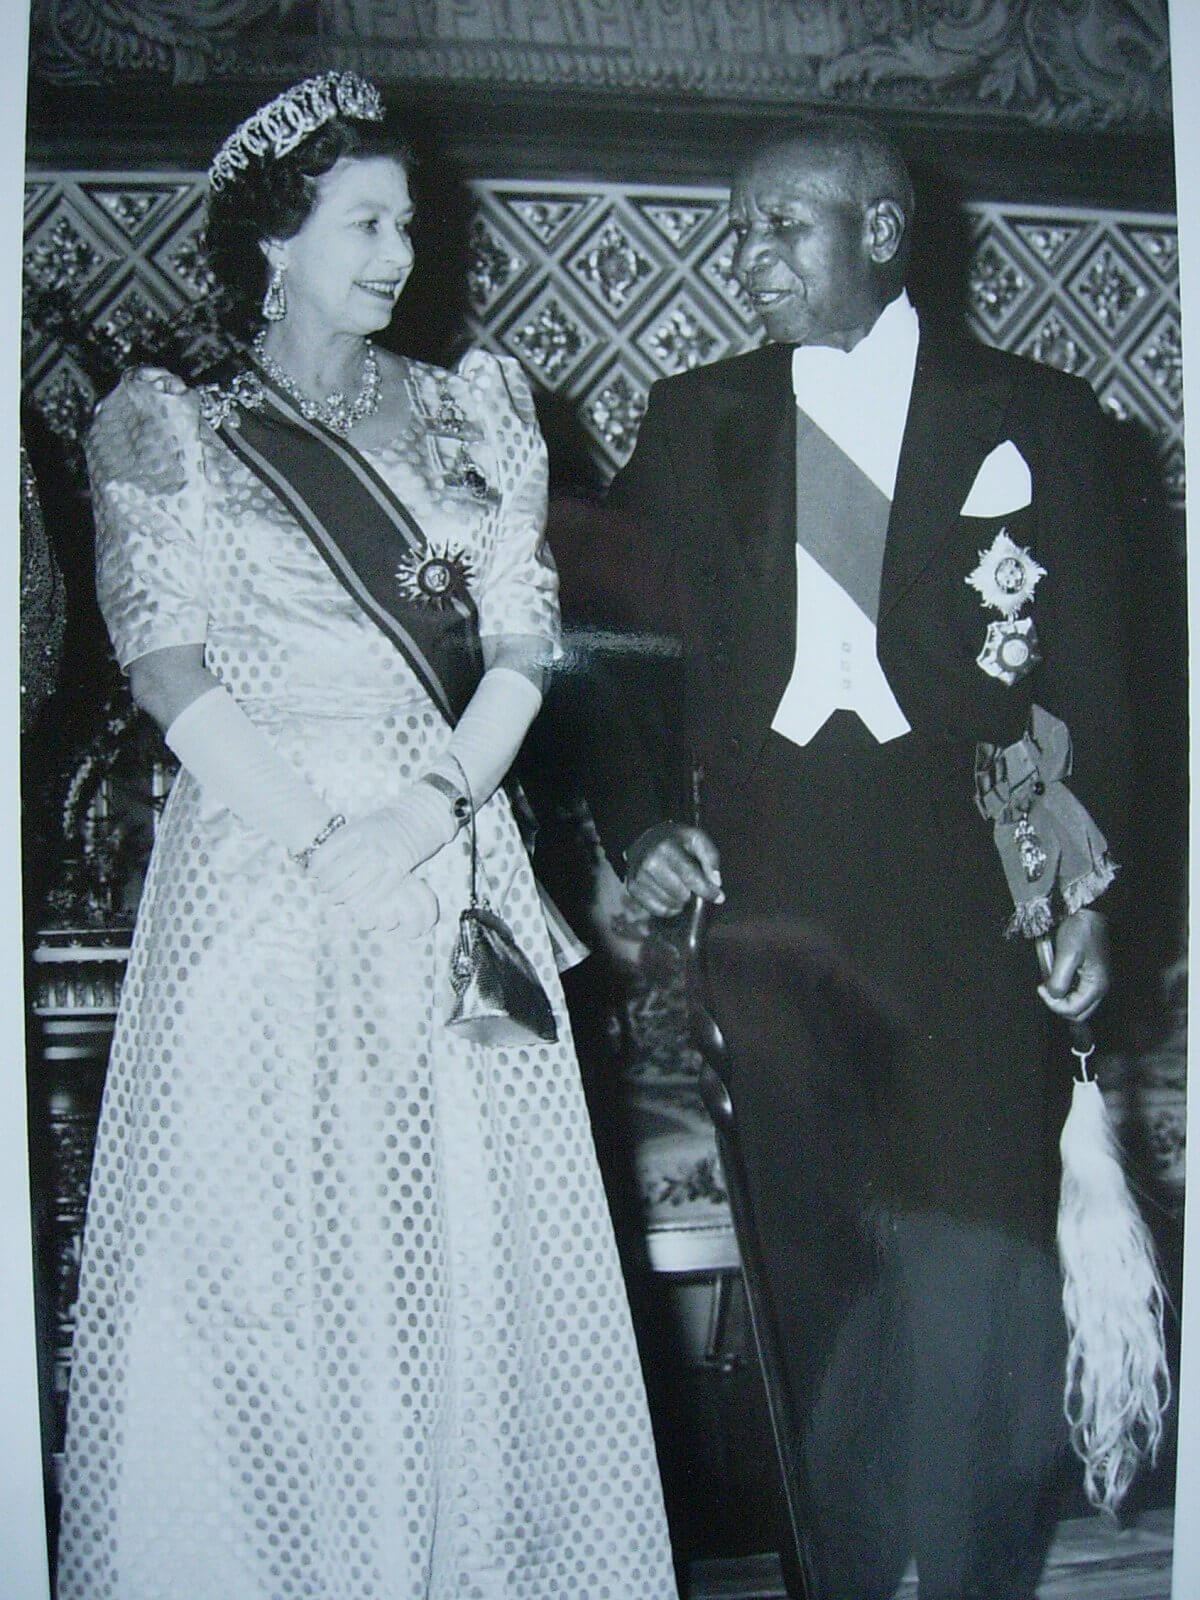 HASTINGS BANDA (CA. 1896-1997) - The First President of Malawi - African Leaders Magazine 